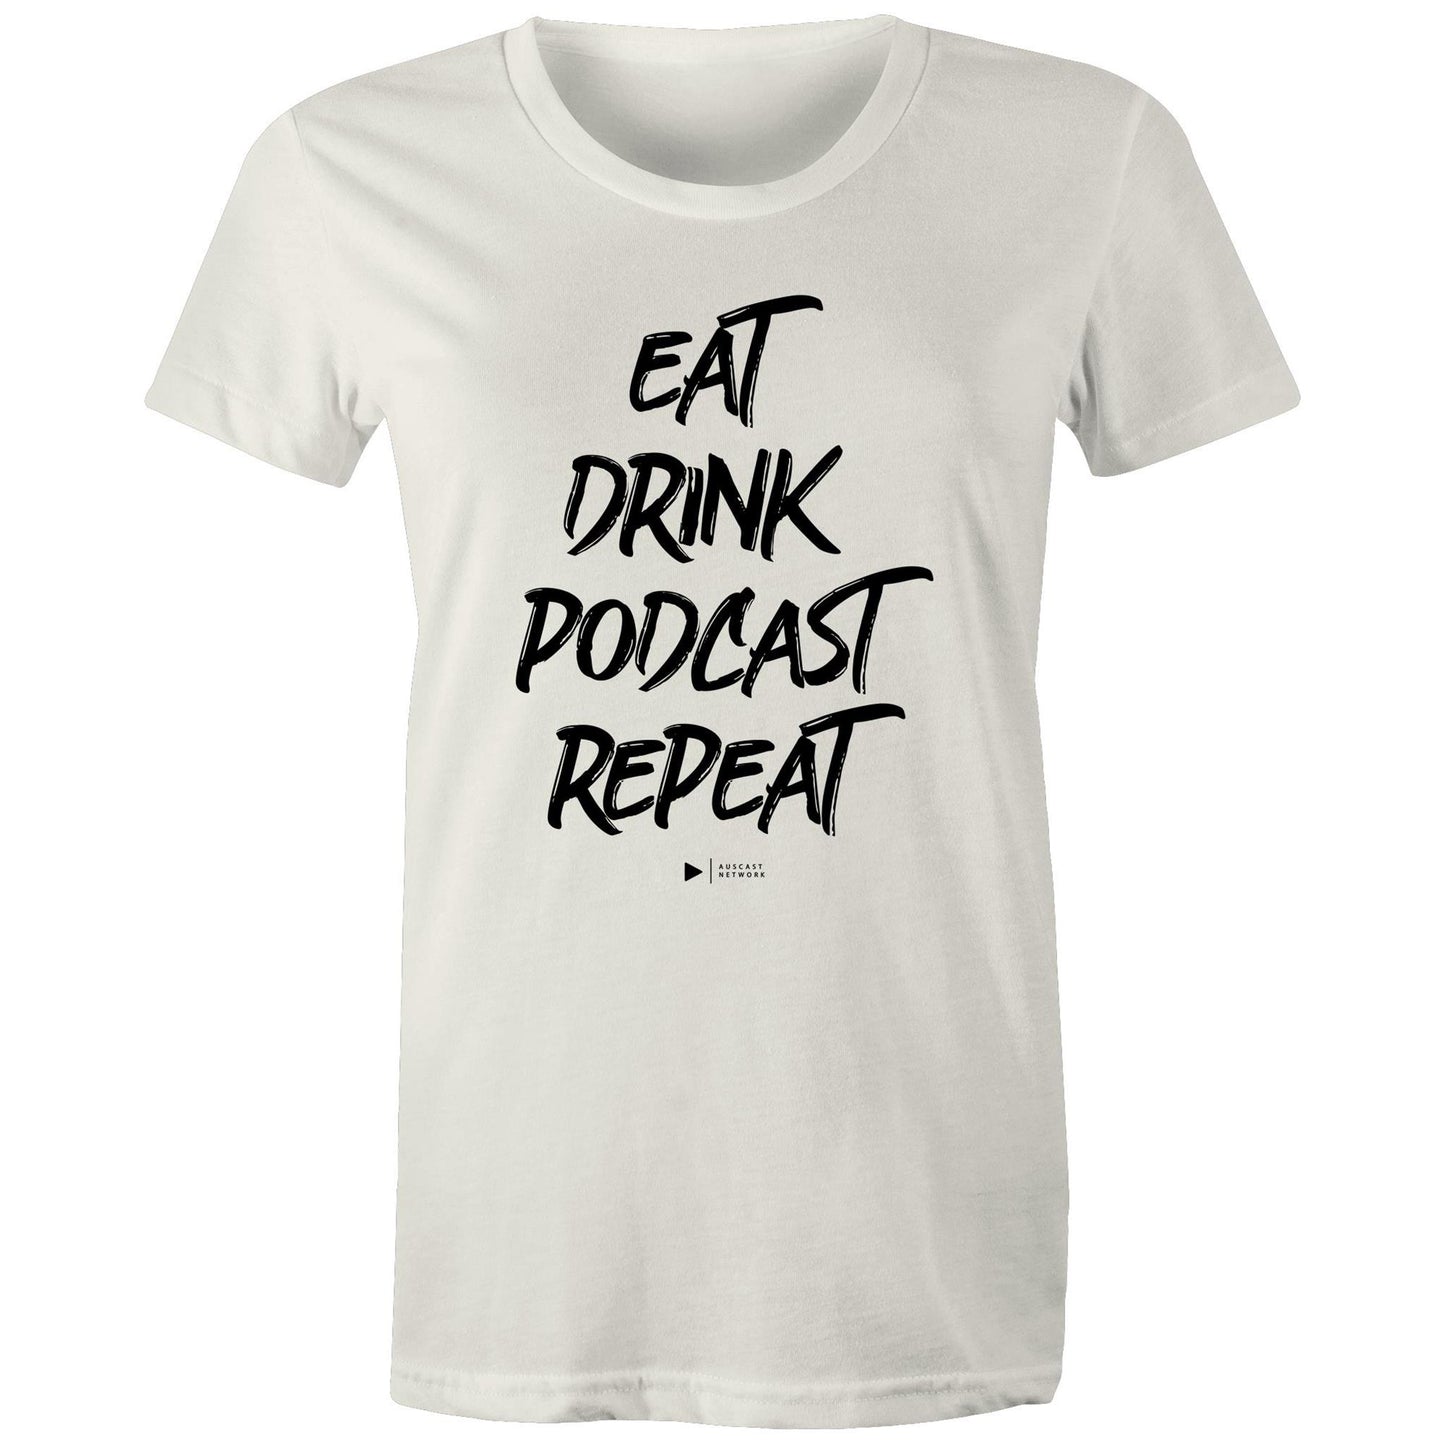 Eat, Drink, Podcast, Repeat (Black Font) - AS Colour - Women's Maple Organic Tee